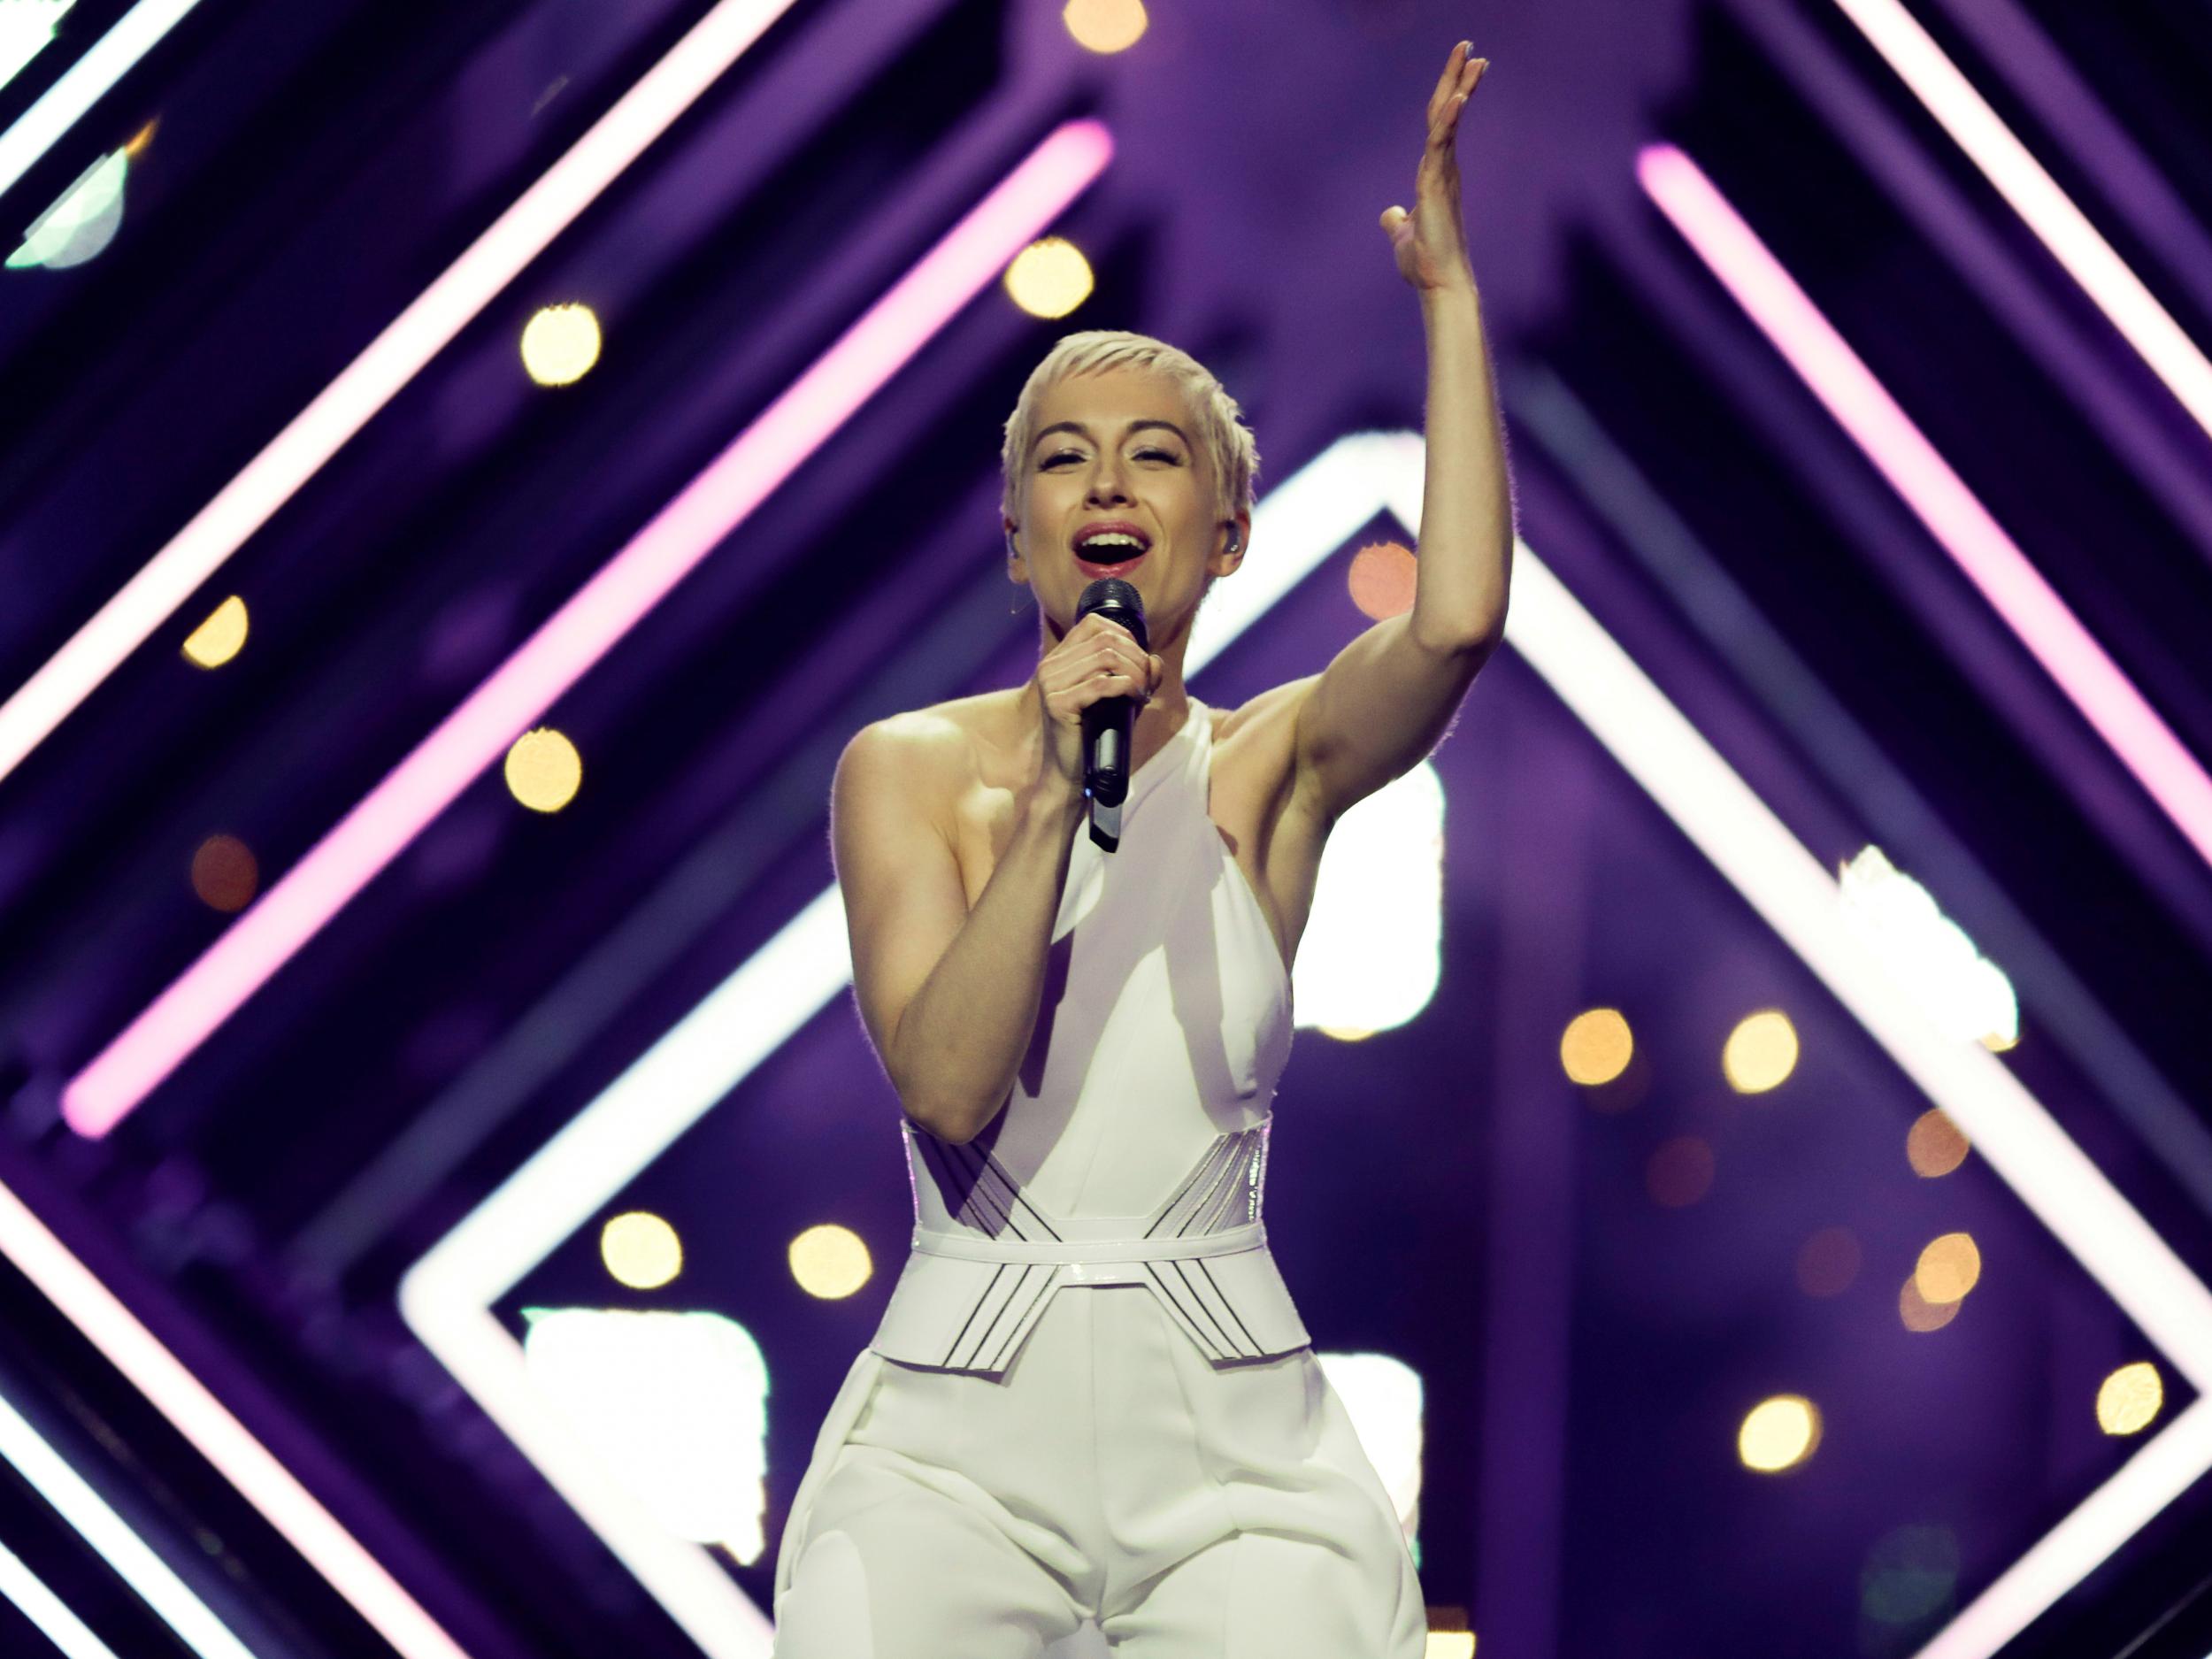 The UK's SuRie performs "Storm" during a dress rehearsal for Eurovision Song Contest 2018 at the Altice Arena in Lisbon, Portugal